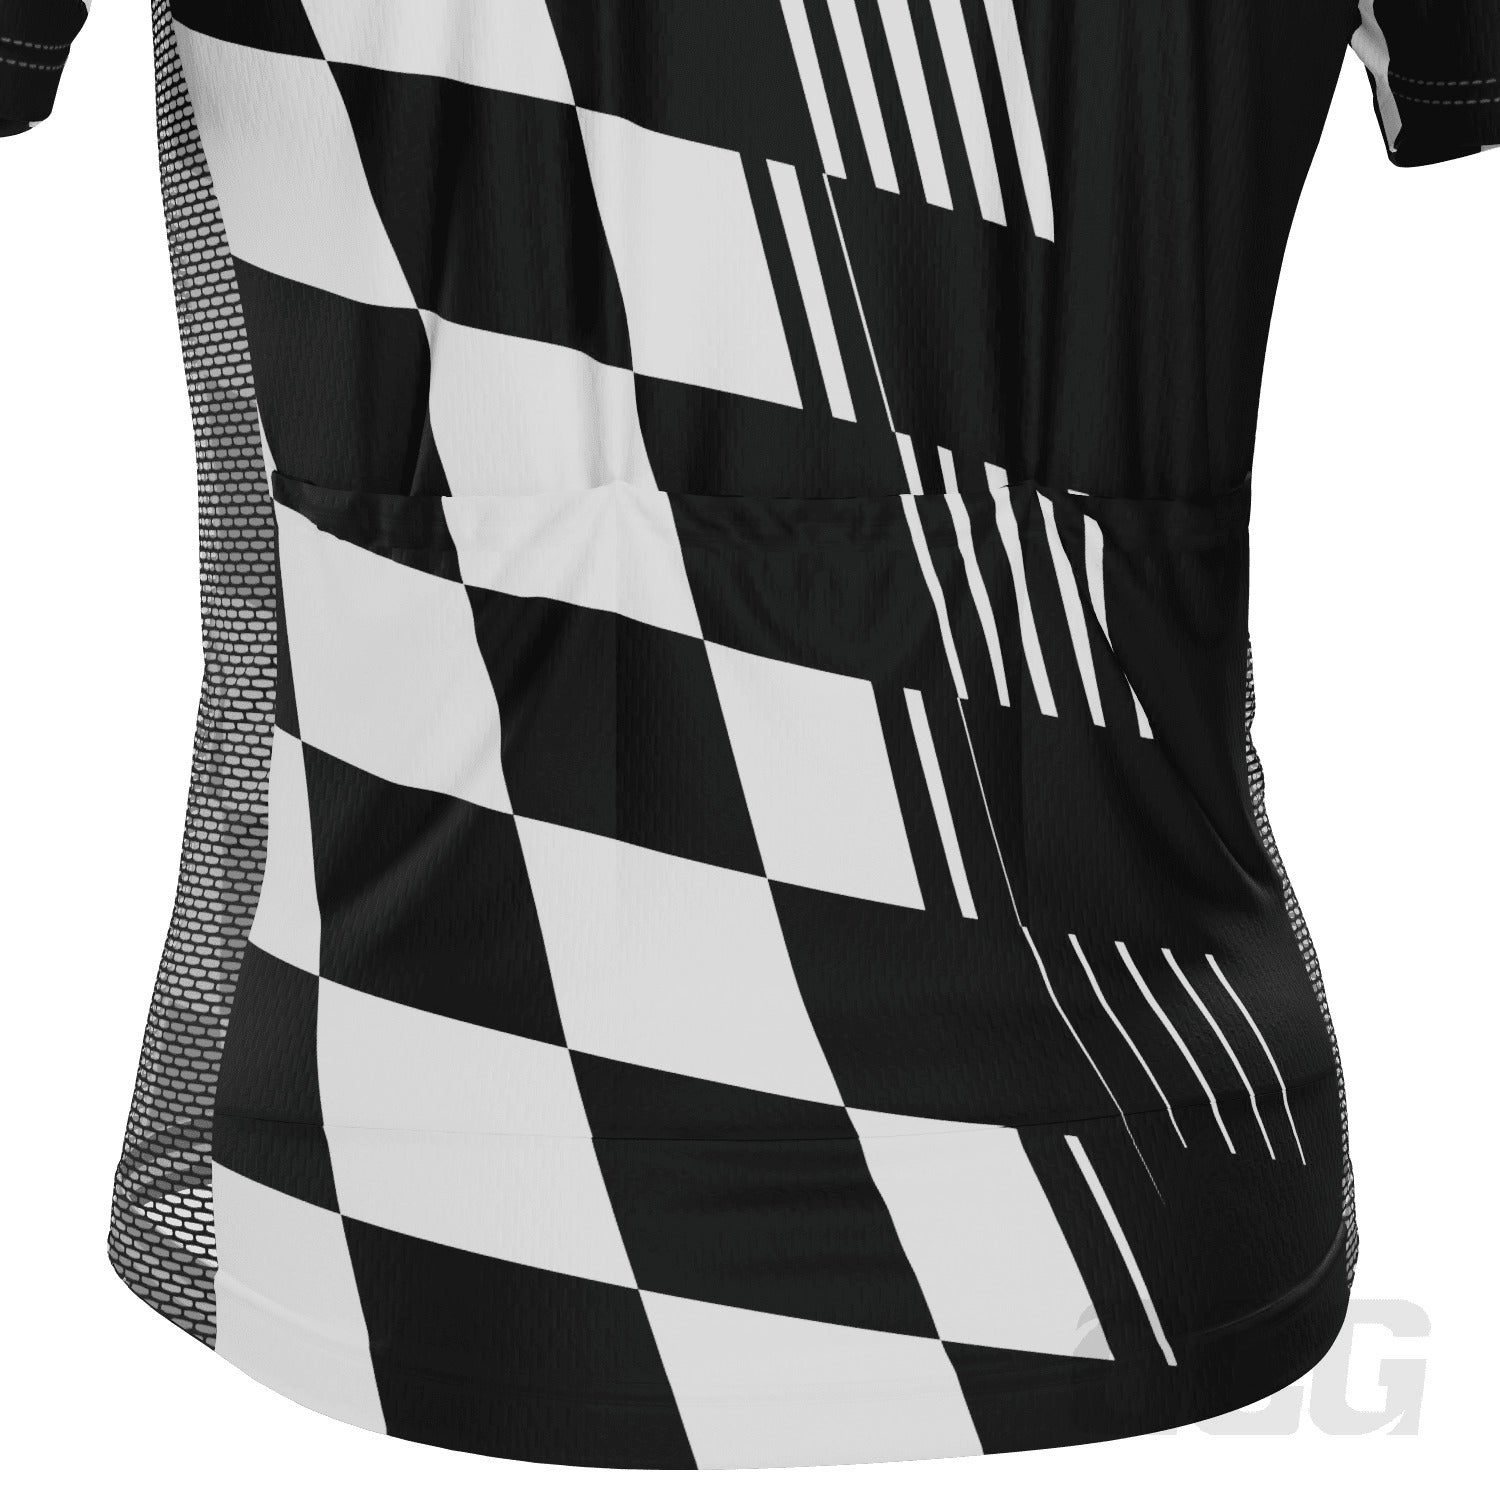 Men's Athletic Modern Auto Checkered Short Sleeve Cycling Jersey